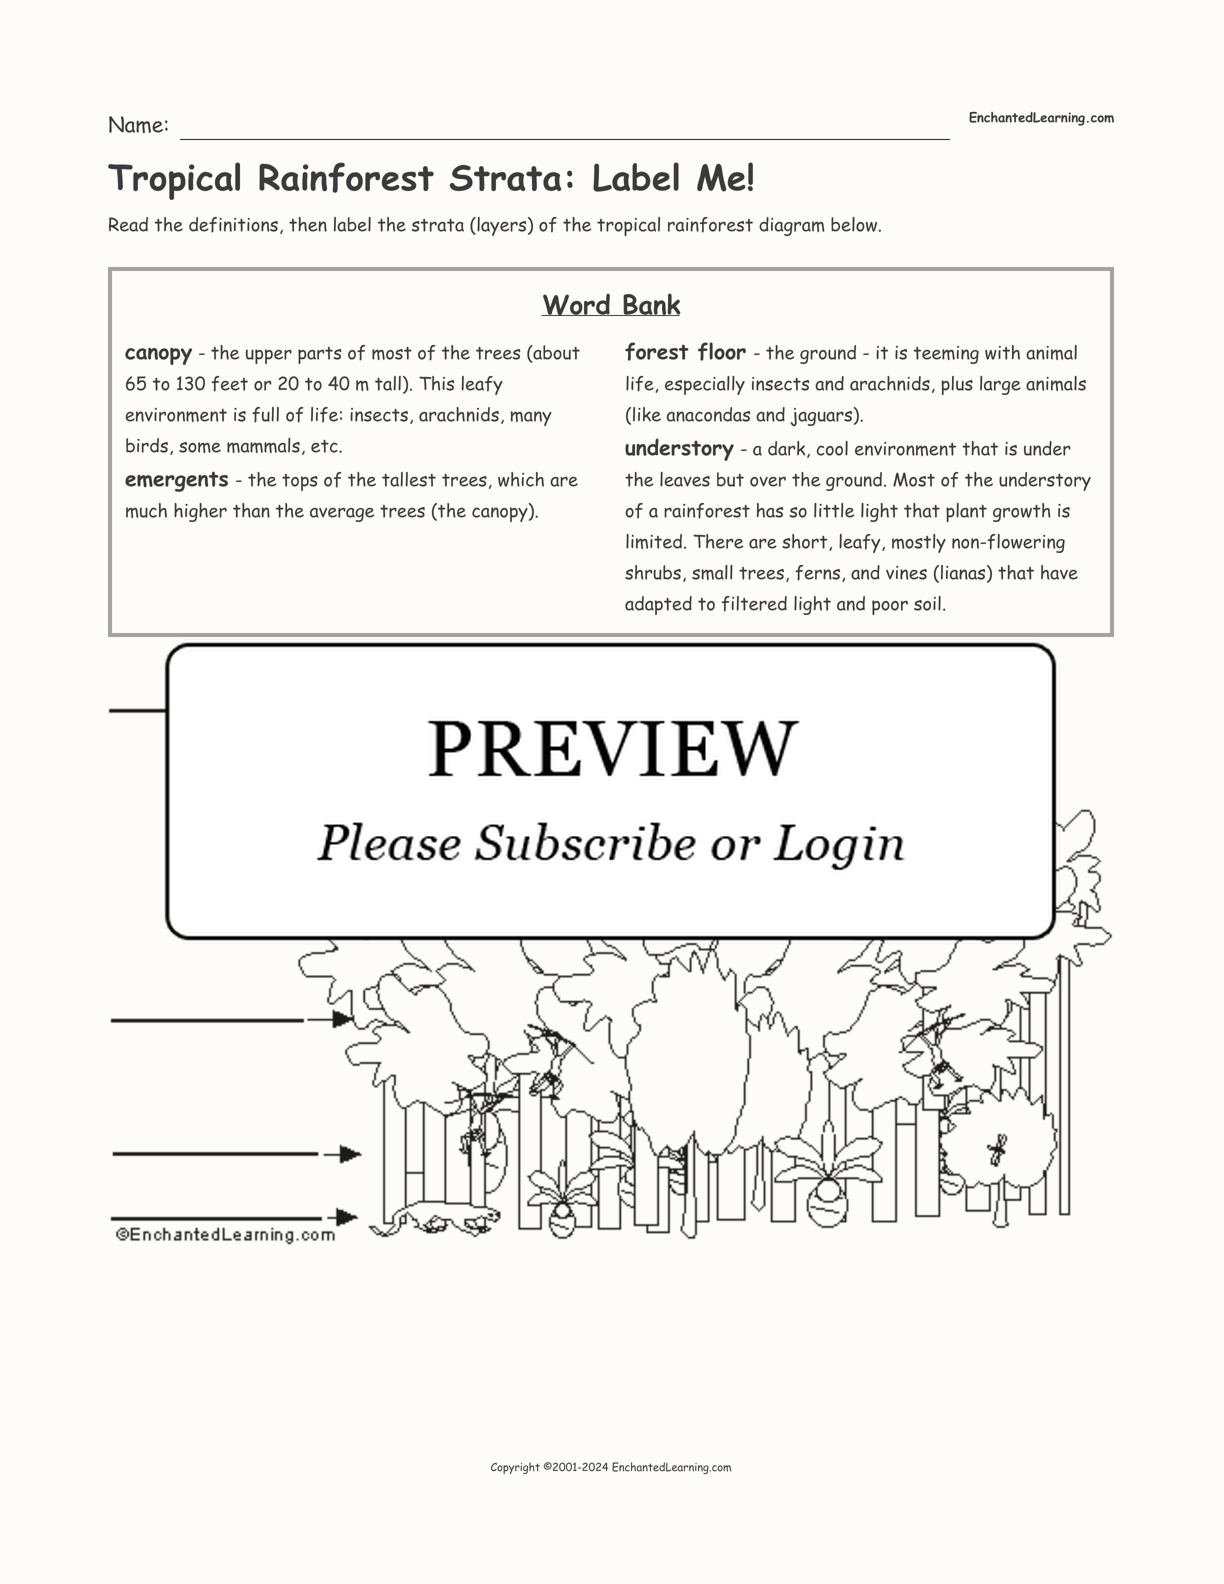 Tropical Rainforest Strata: Label Me! interactive worksheet page 1